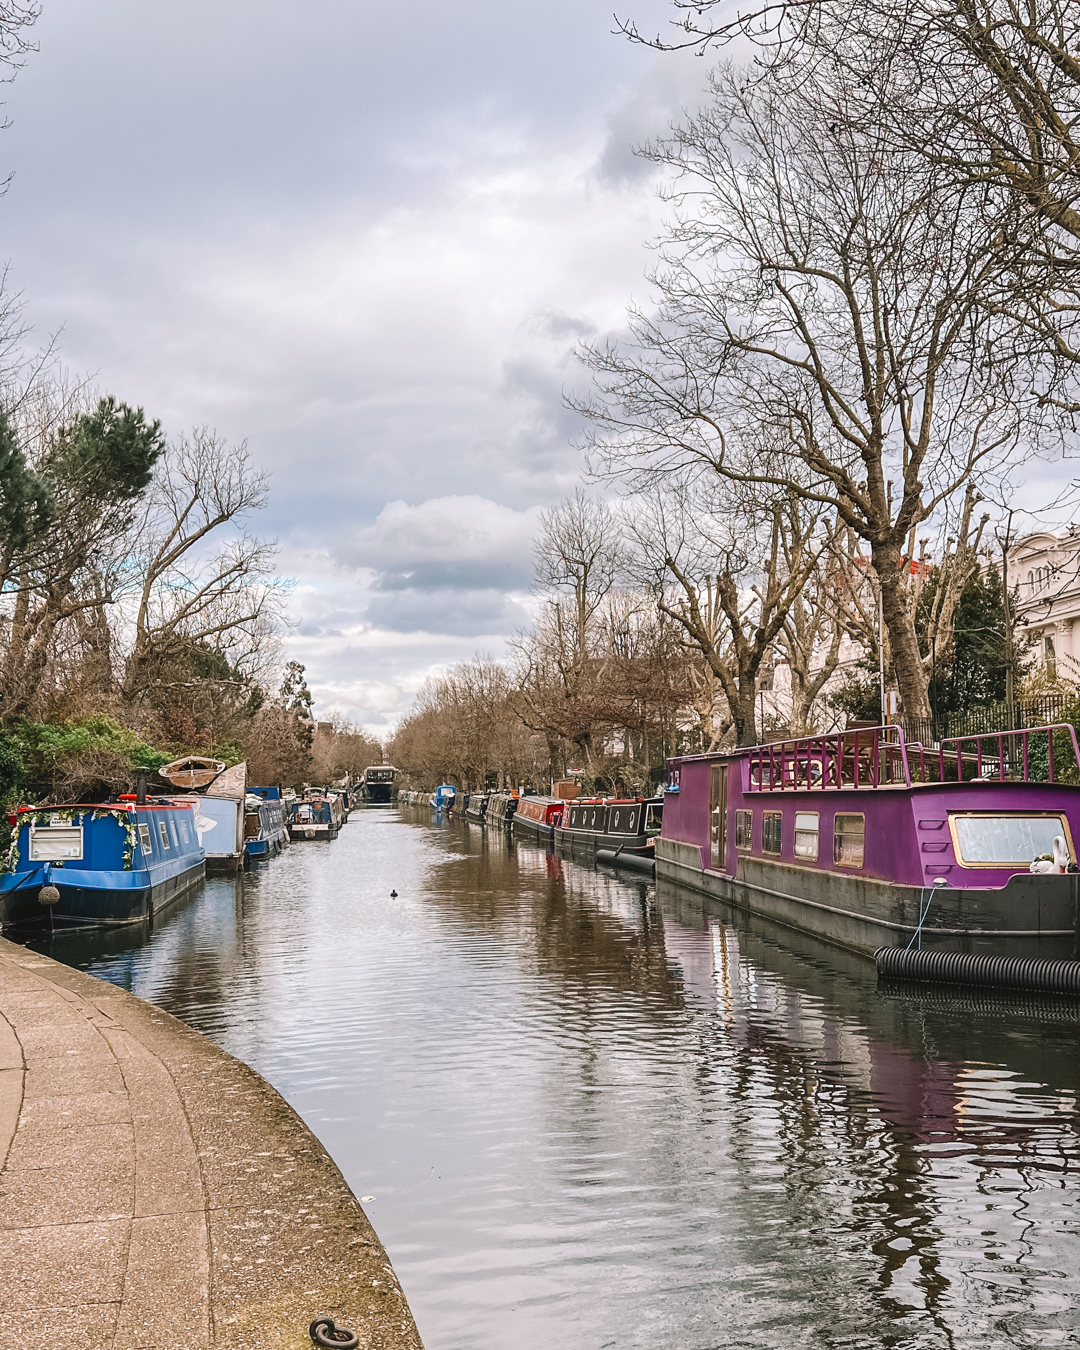 Little Venice - One of the best things to do in North London